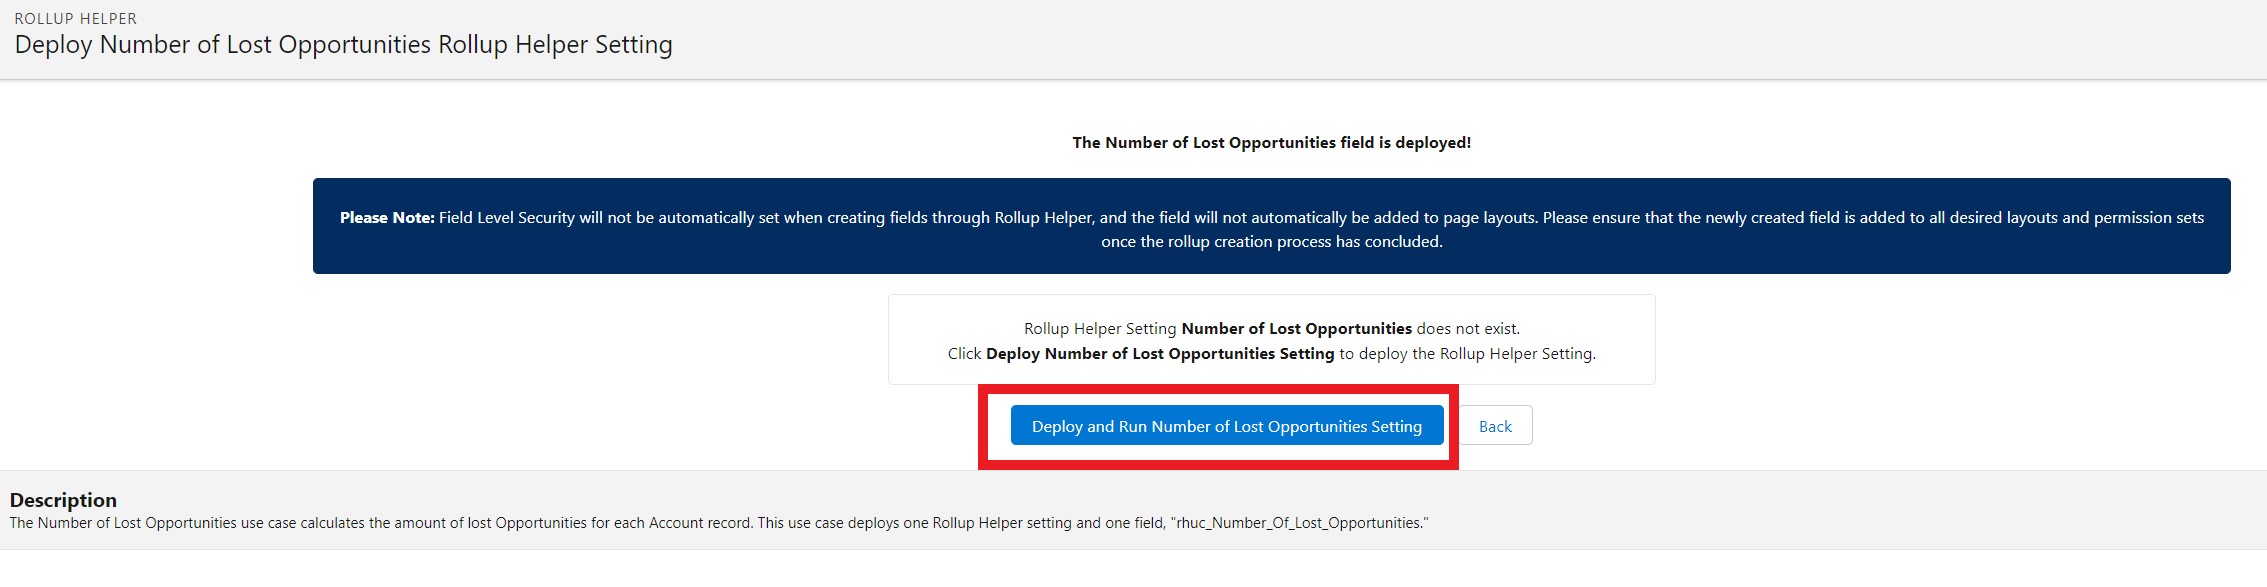 Number of Lost Opportunities deploy setting